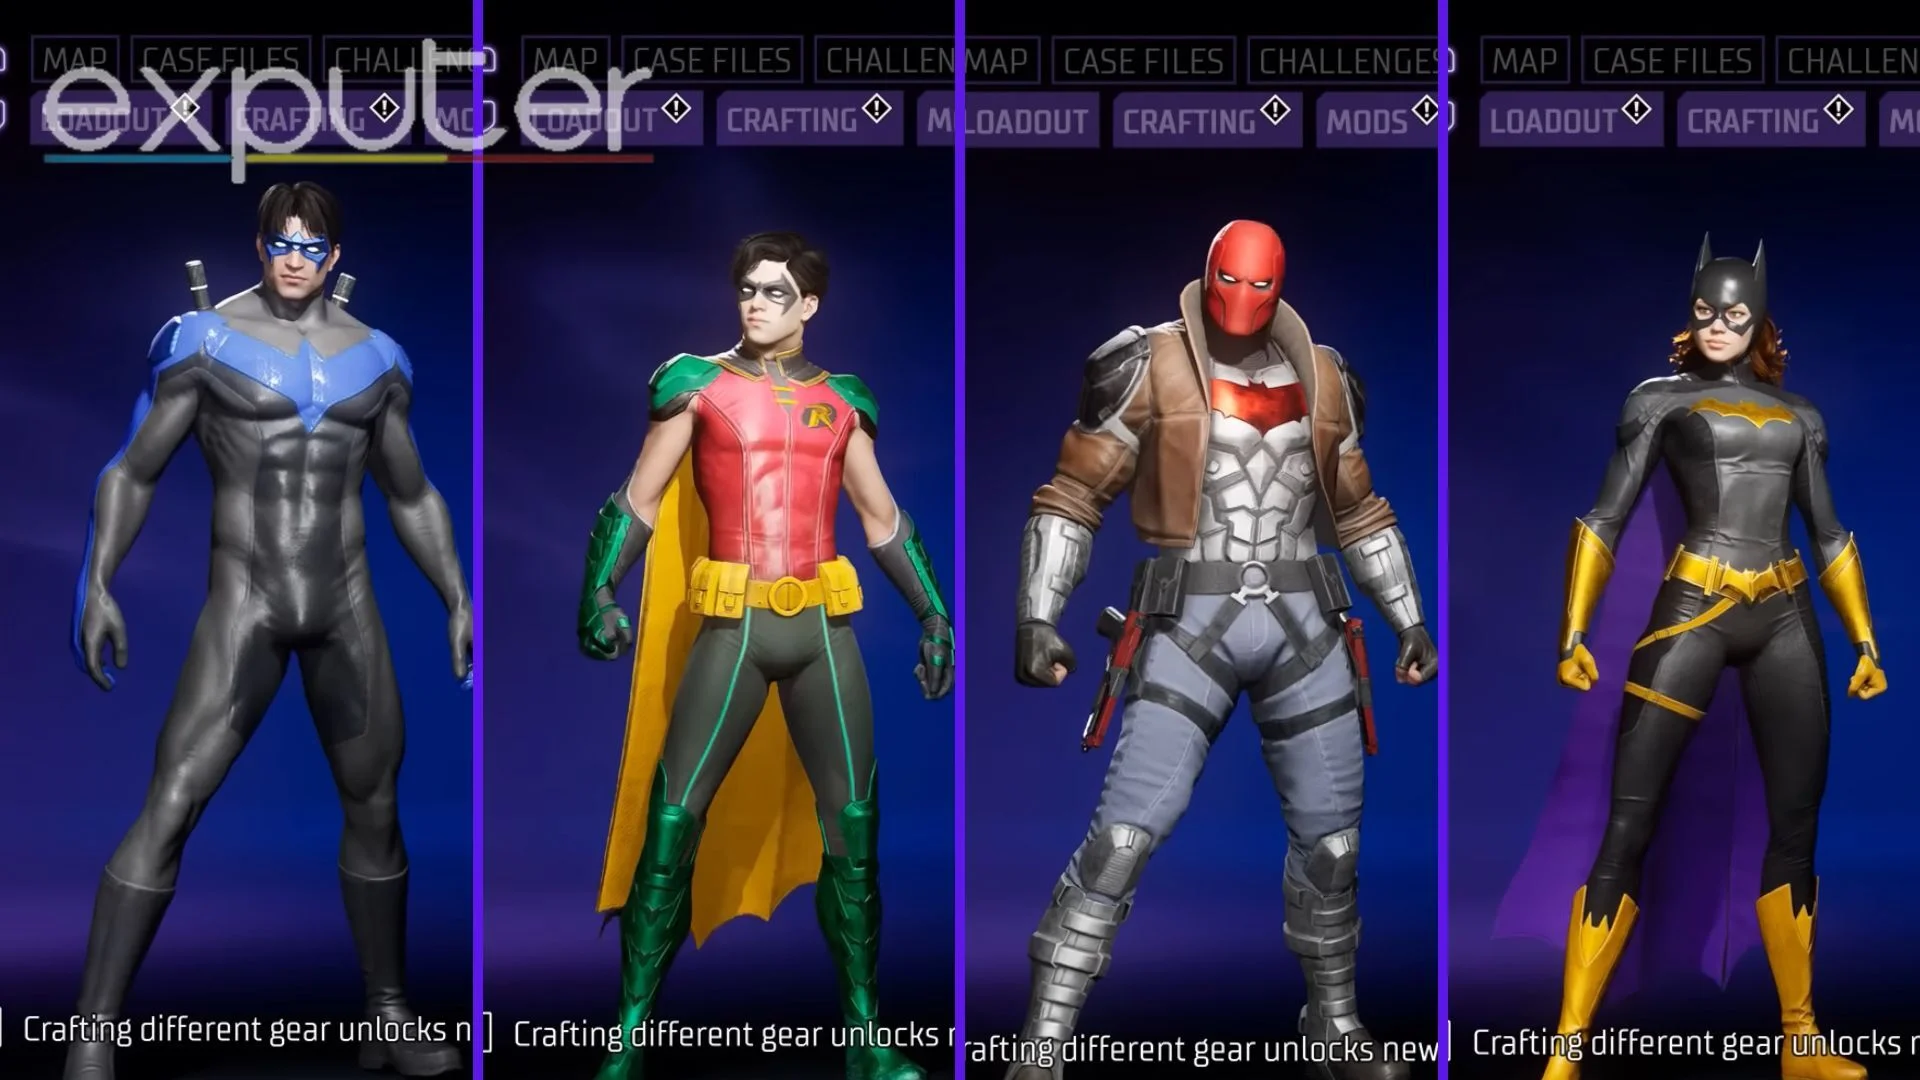 All Robin suits in Gotham Knights ranked